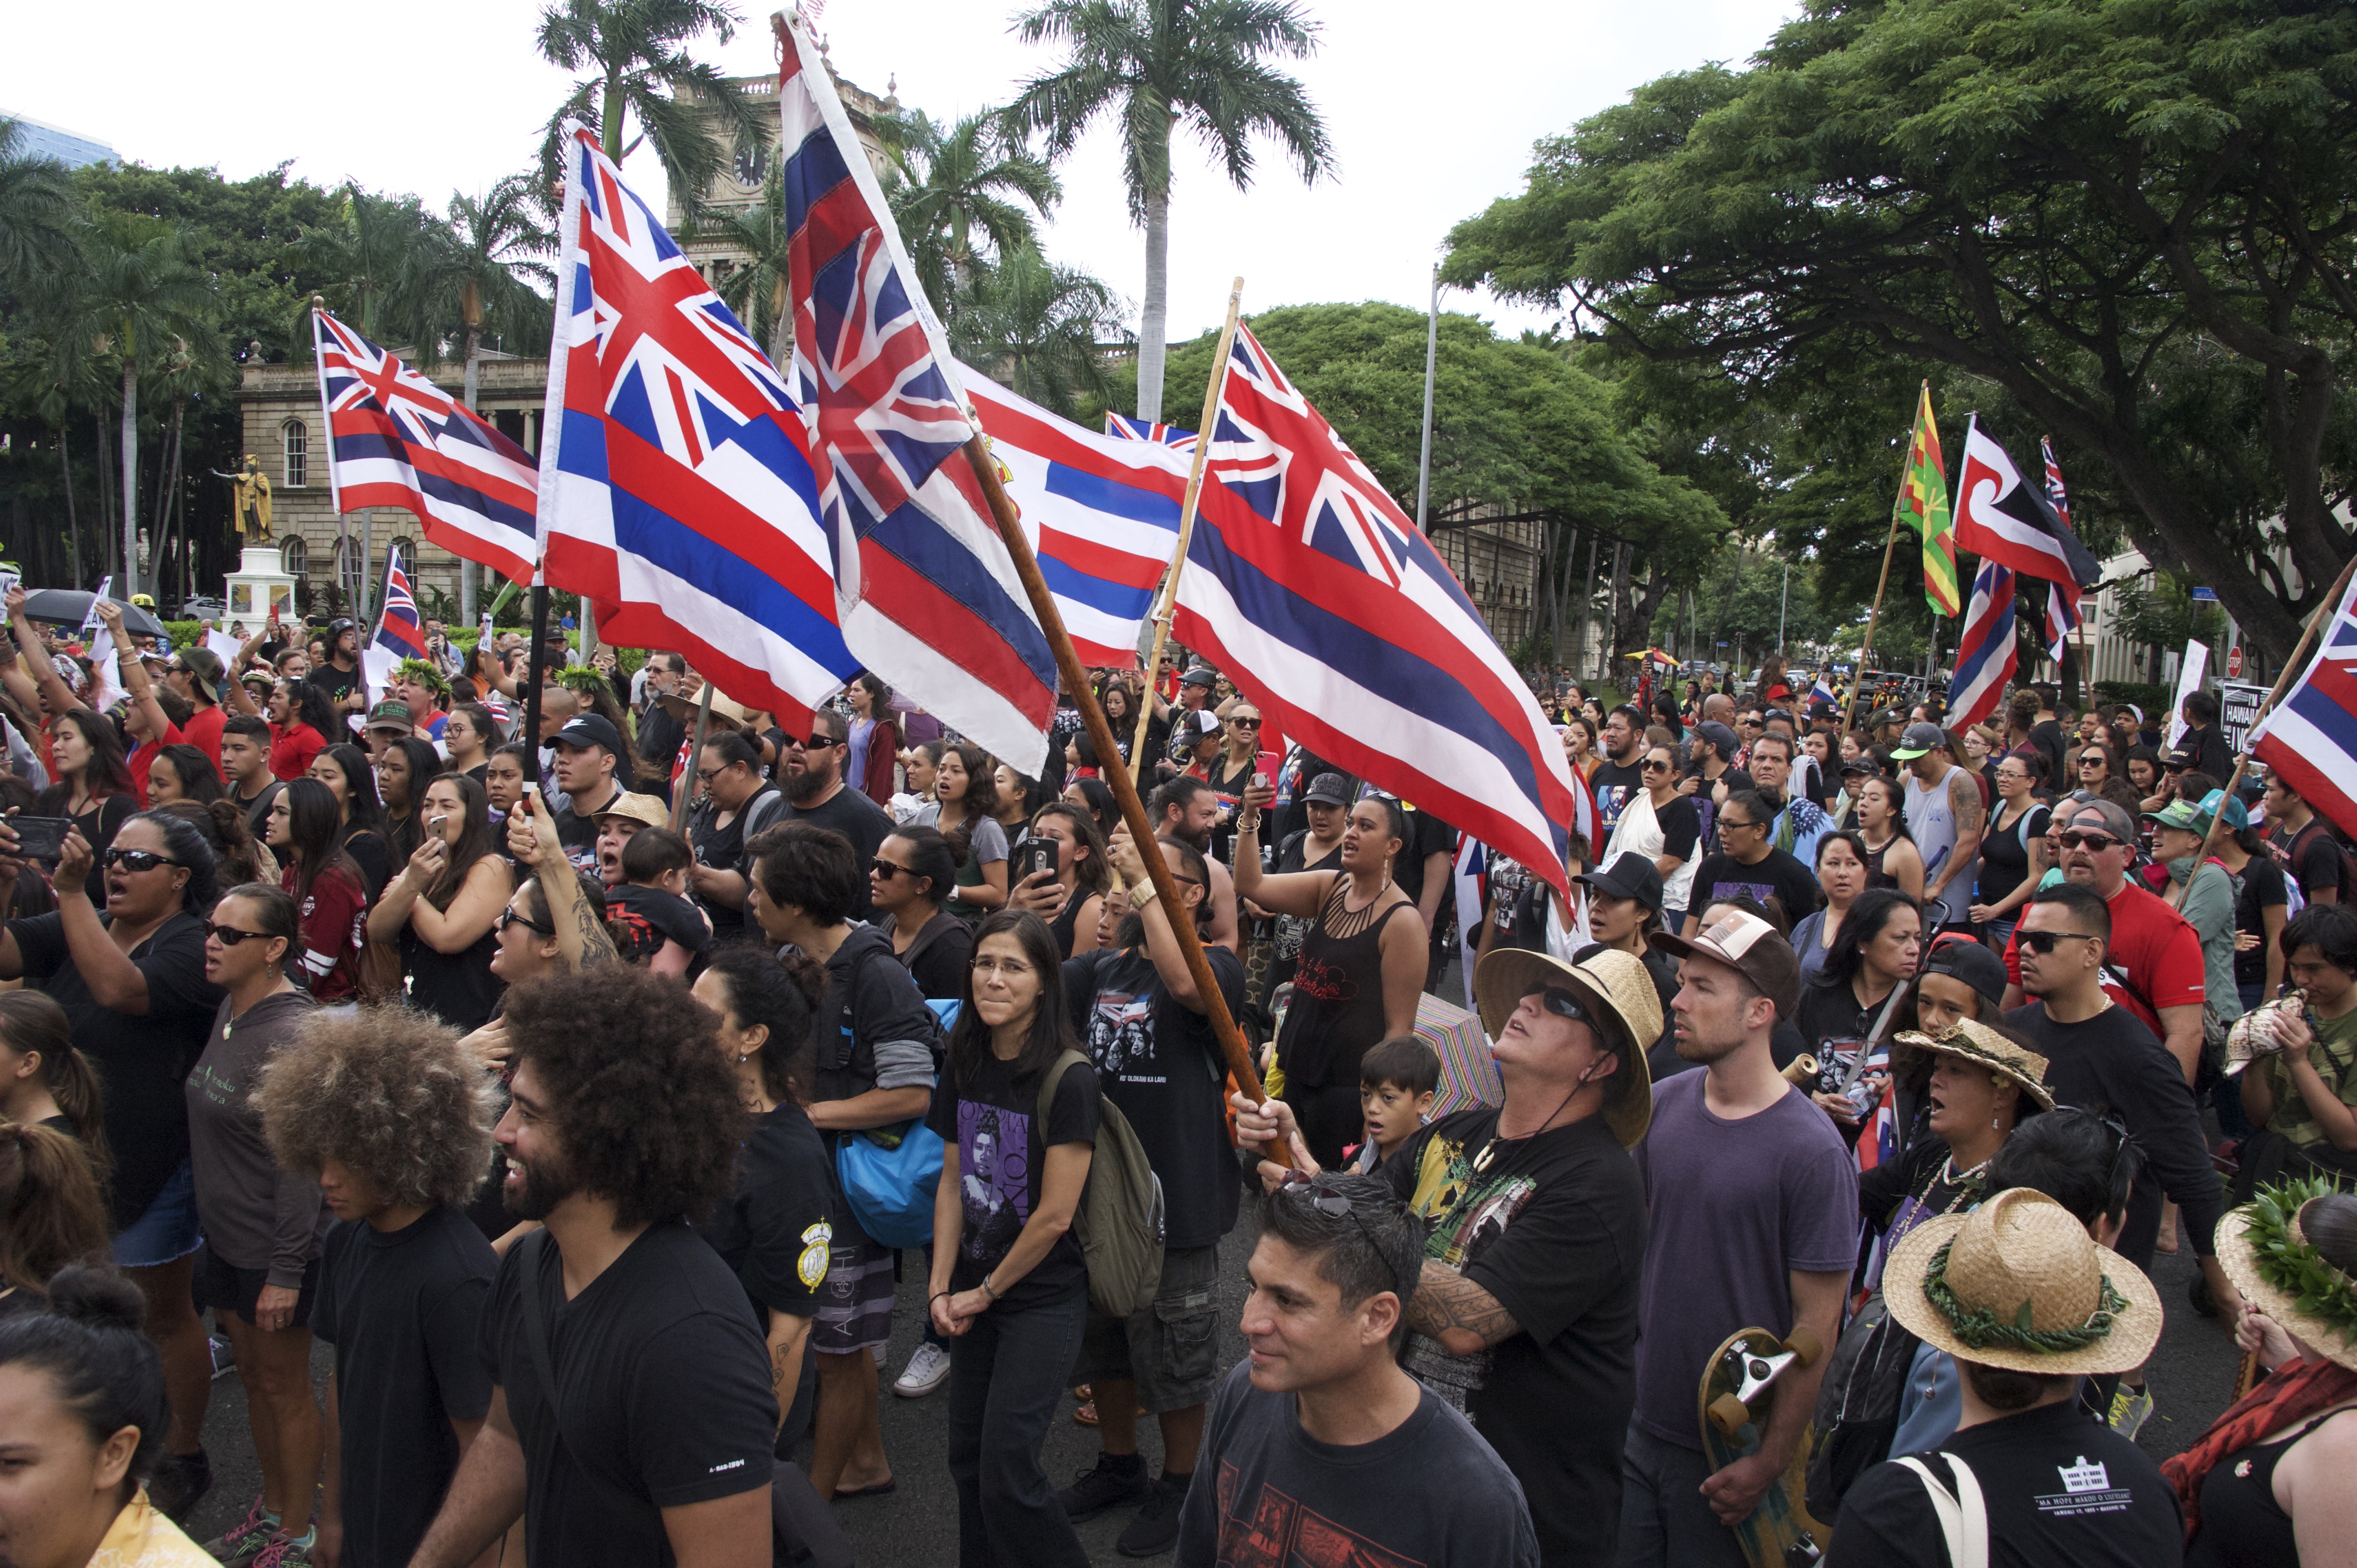 Thousands march to mark the overthrow of the Hawaiian monarchy